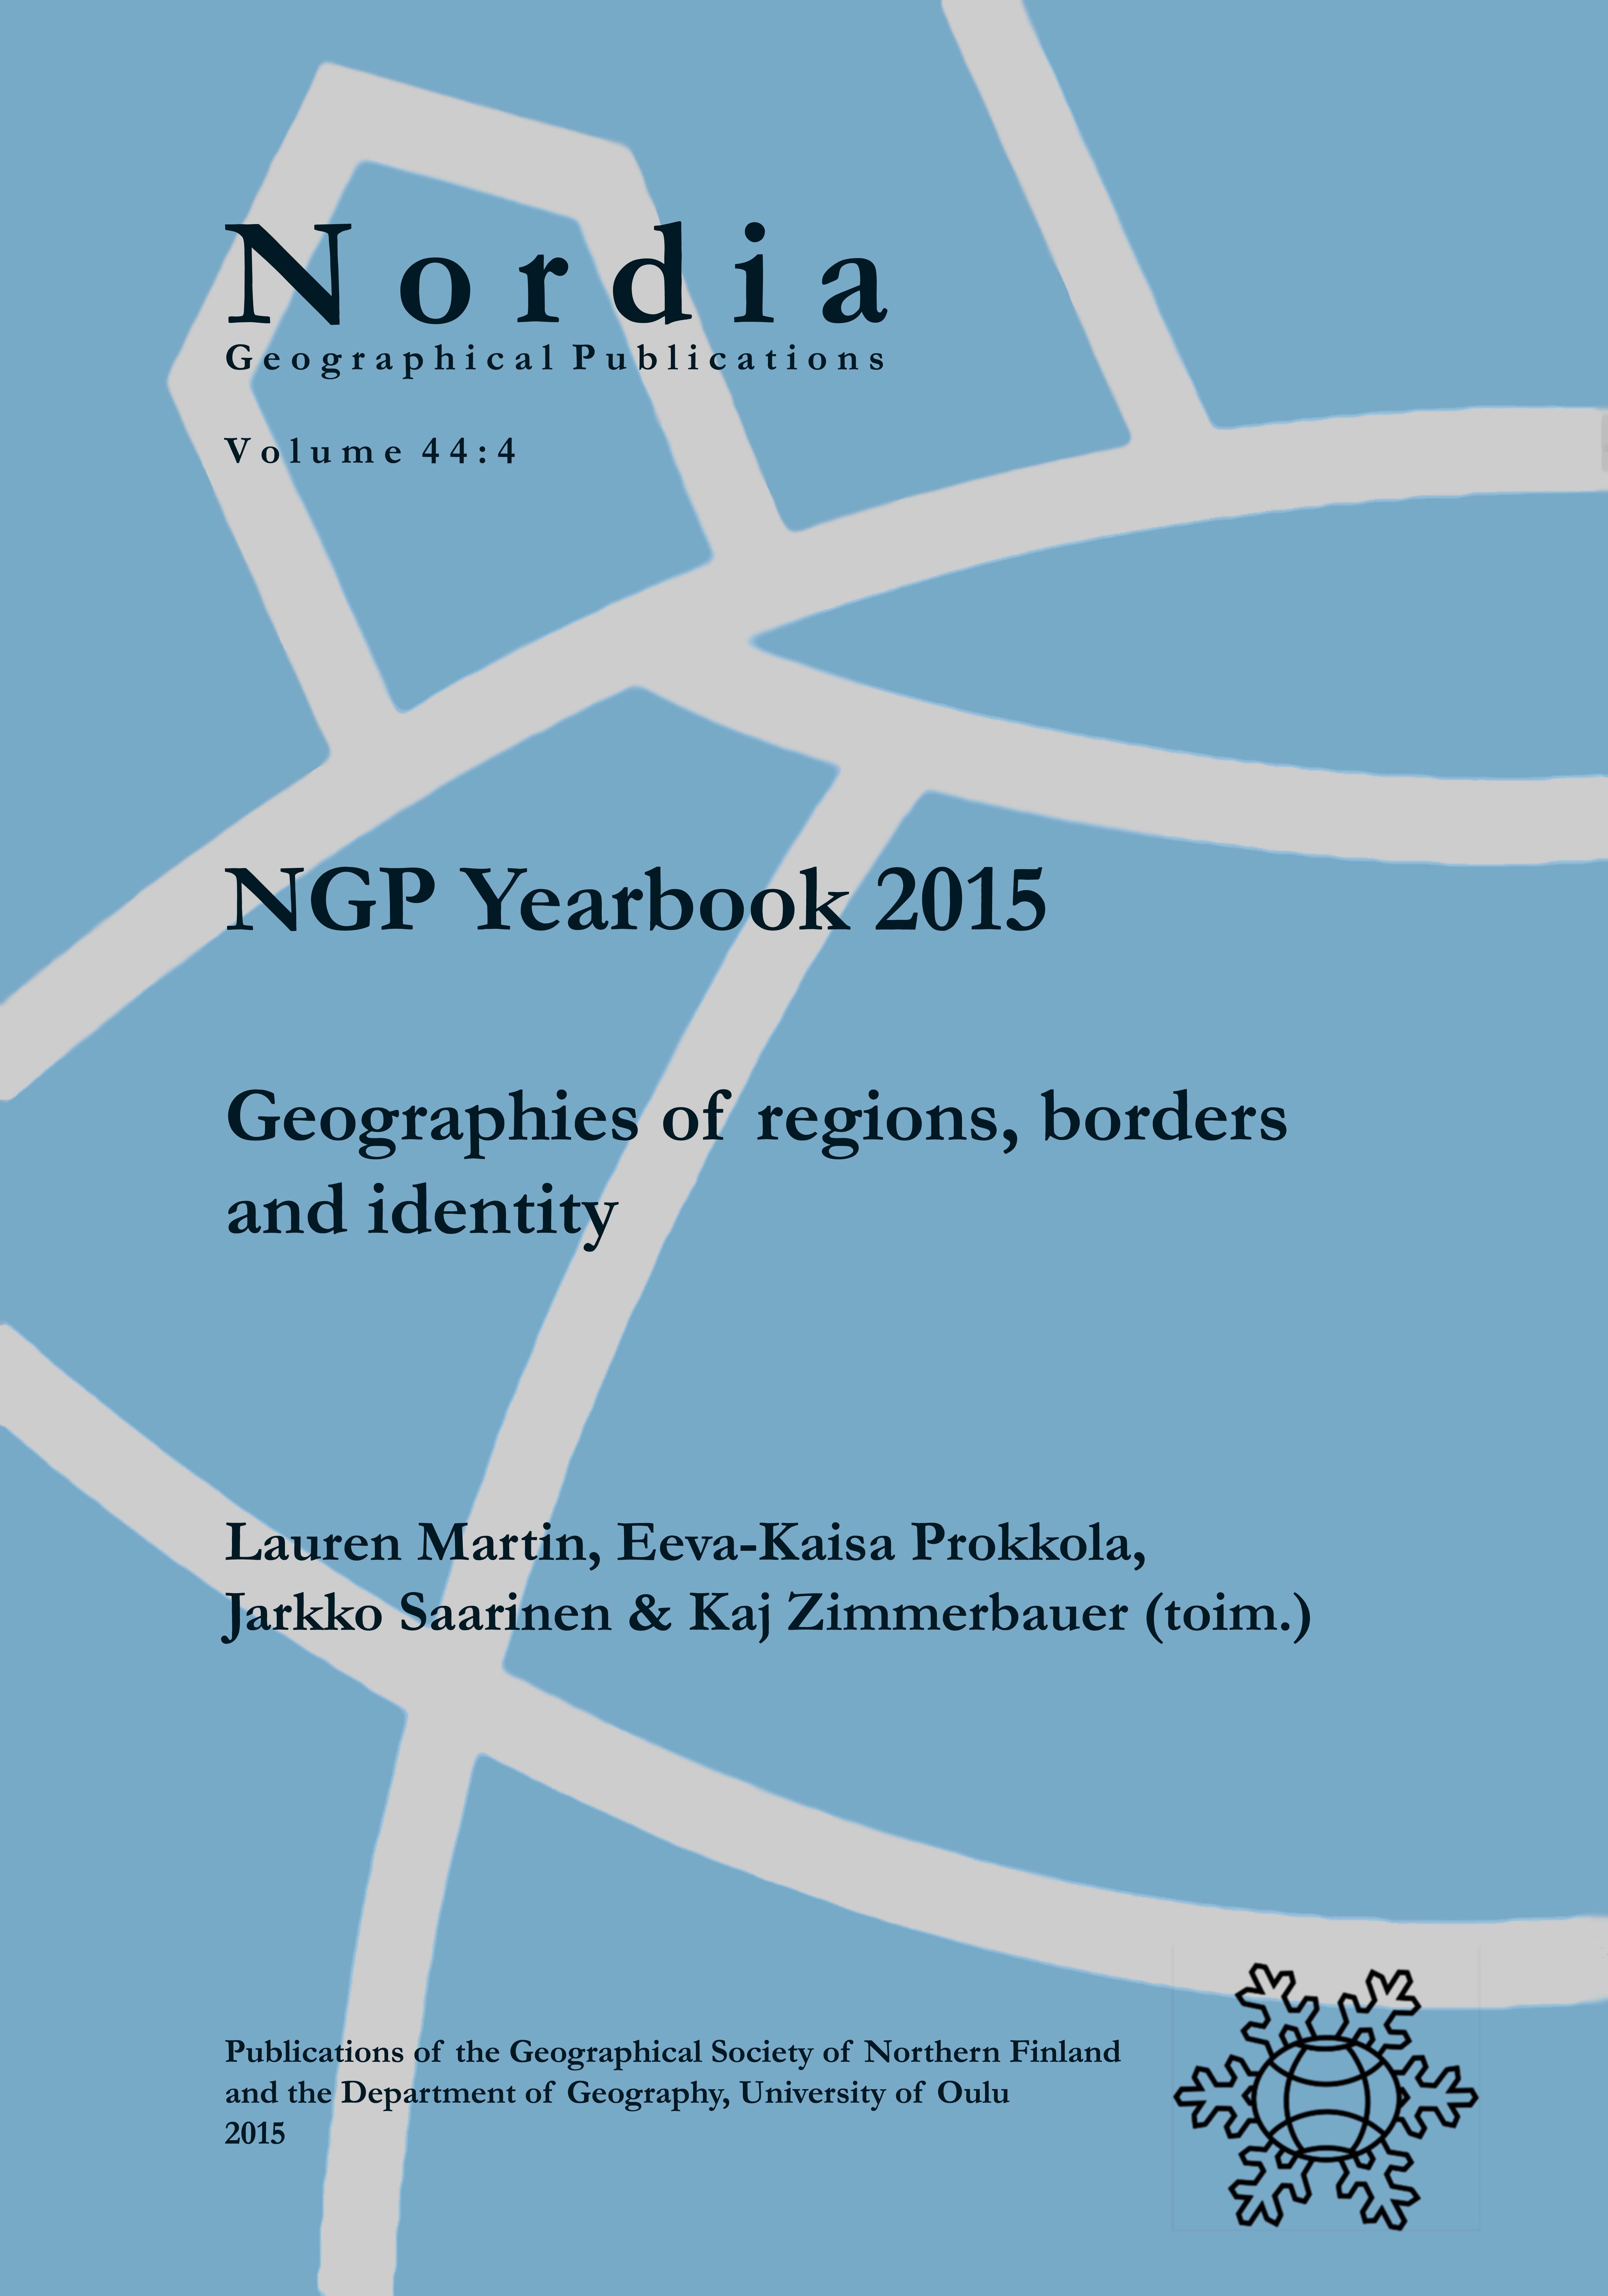 					View Vol. 44 No. 4: NGP Yearbook 2015: Geographies of regions, borders and identity
				